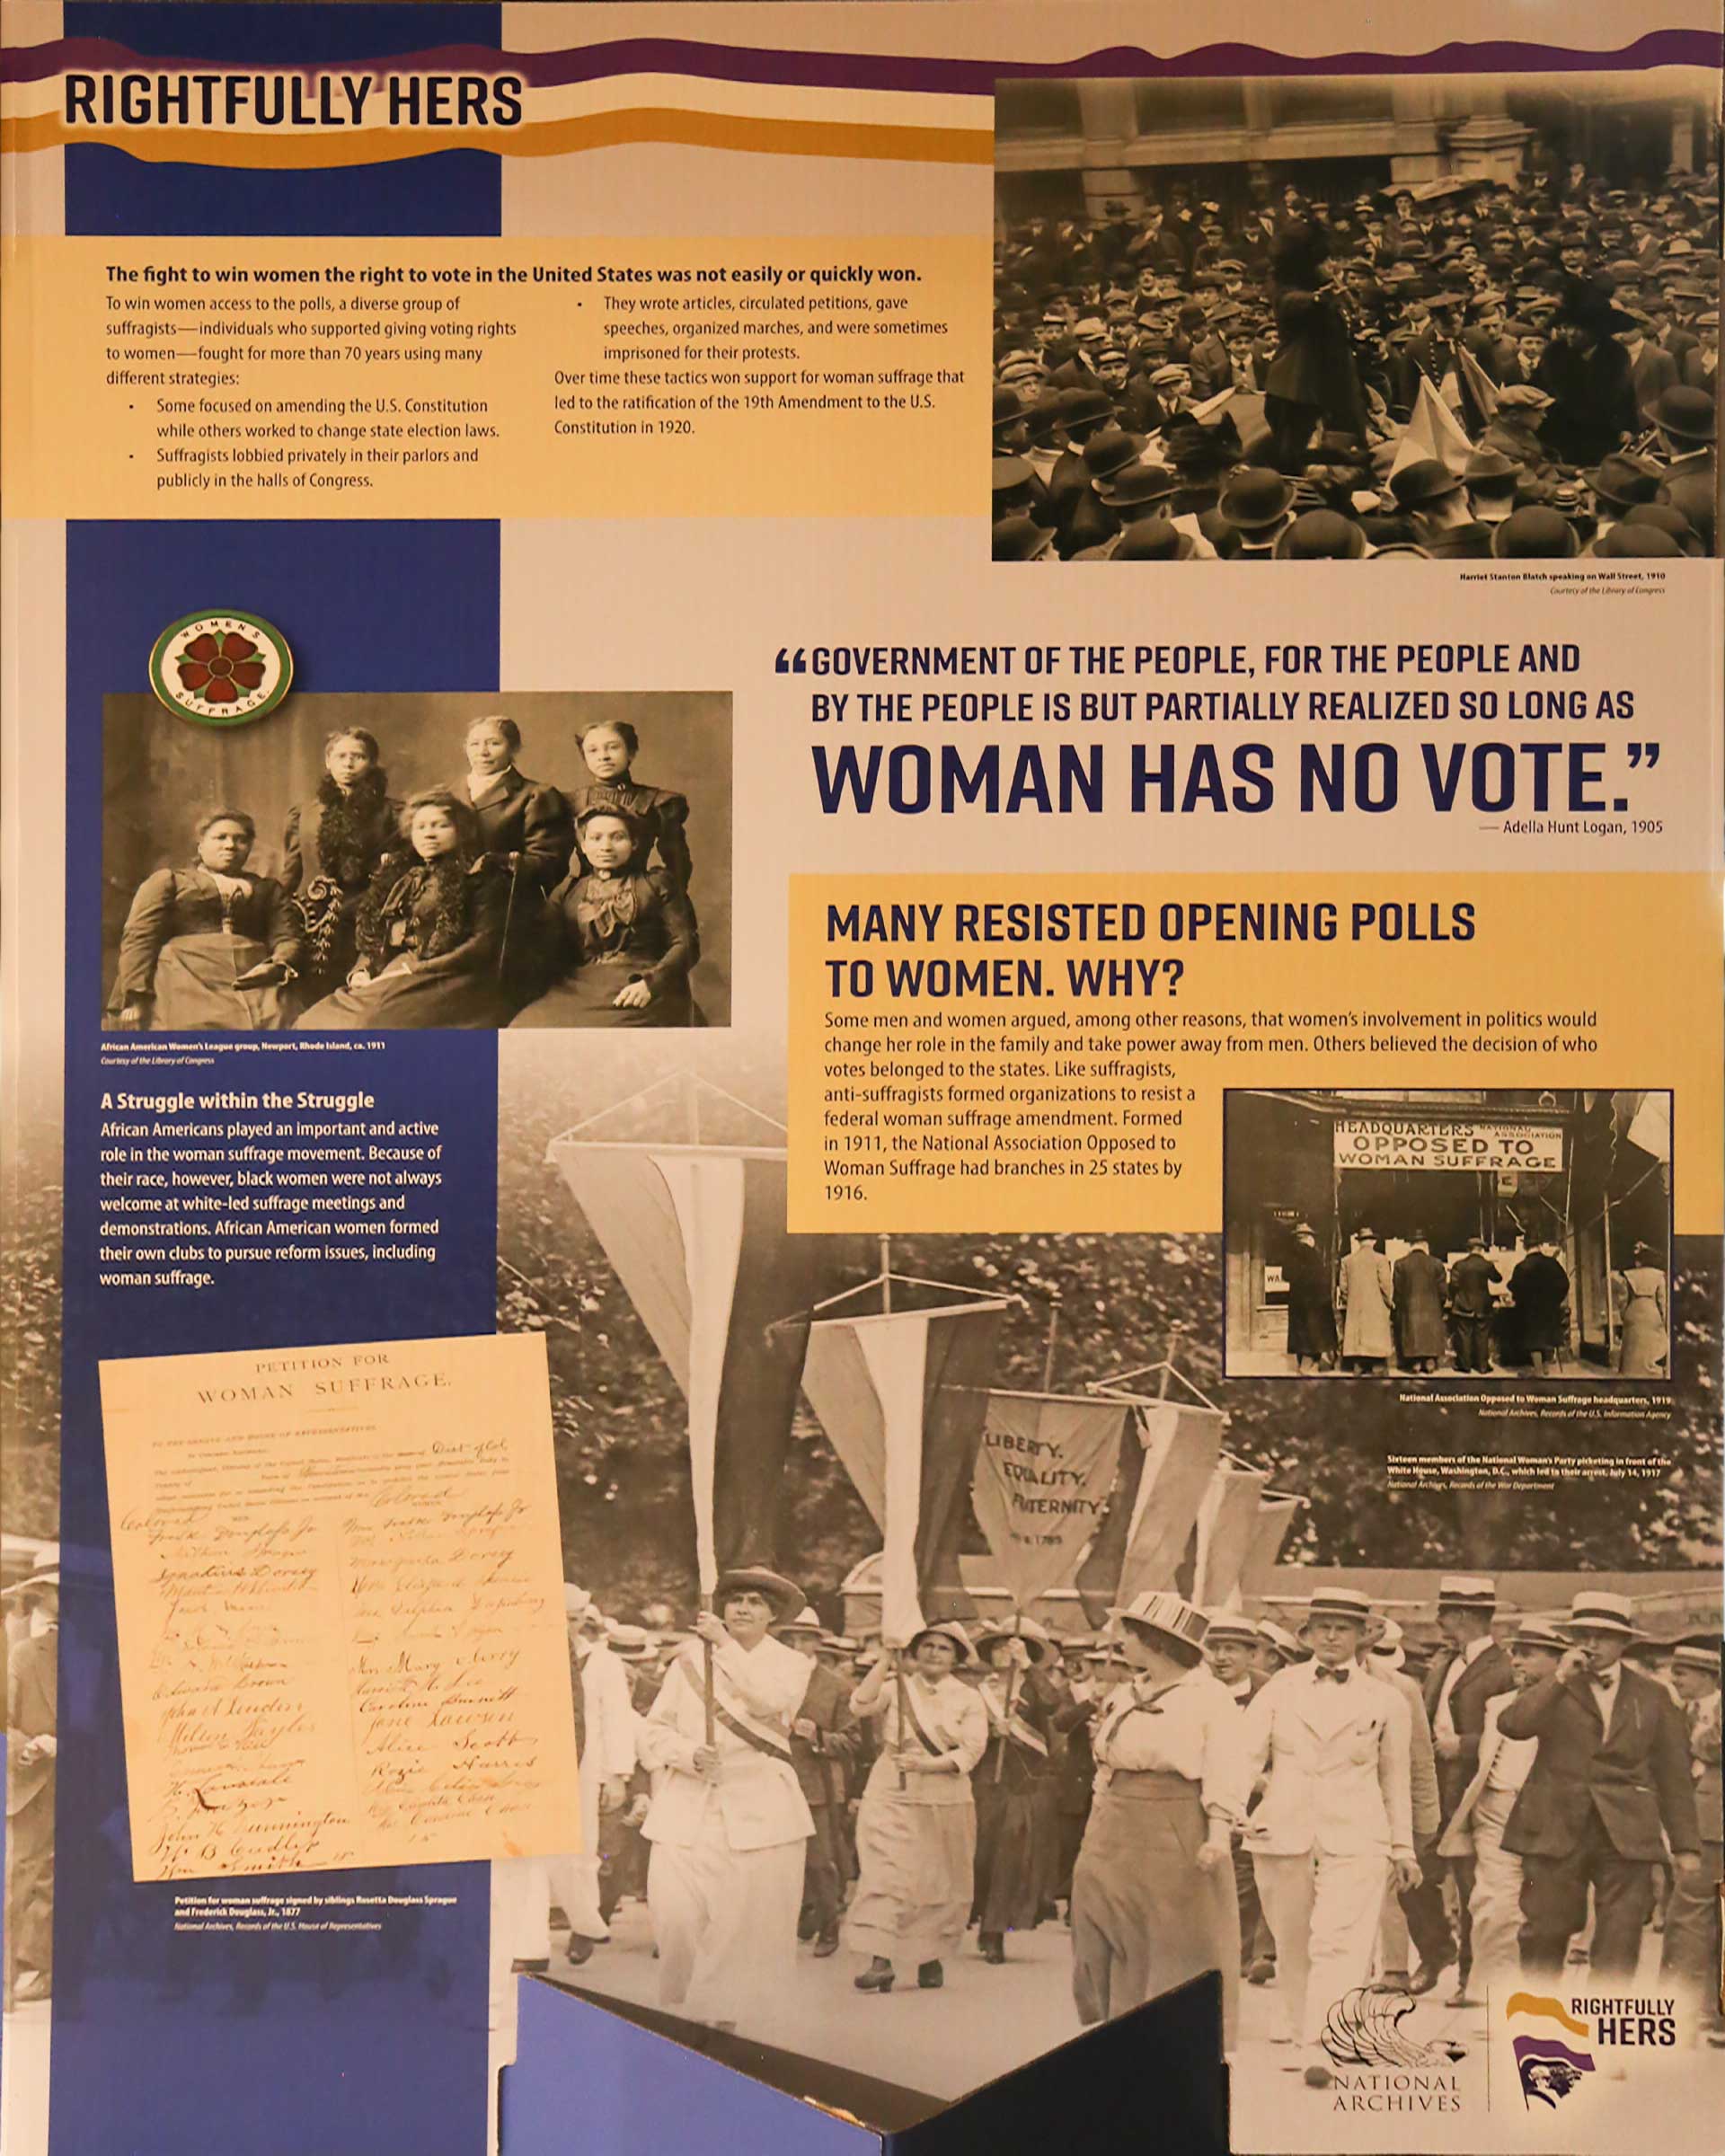 Poster about women's voting rights